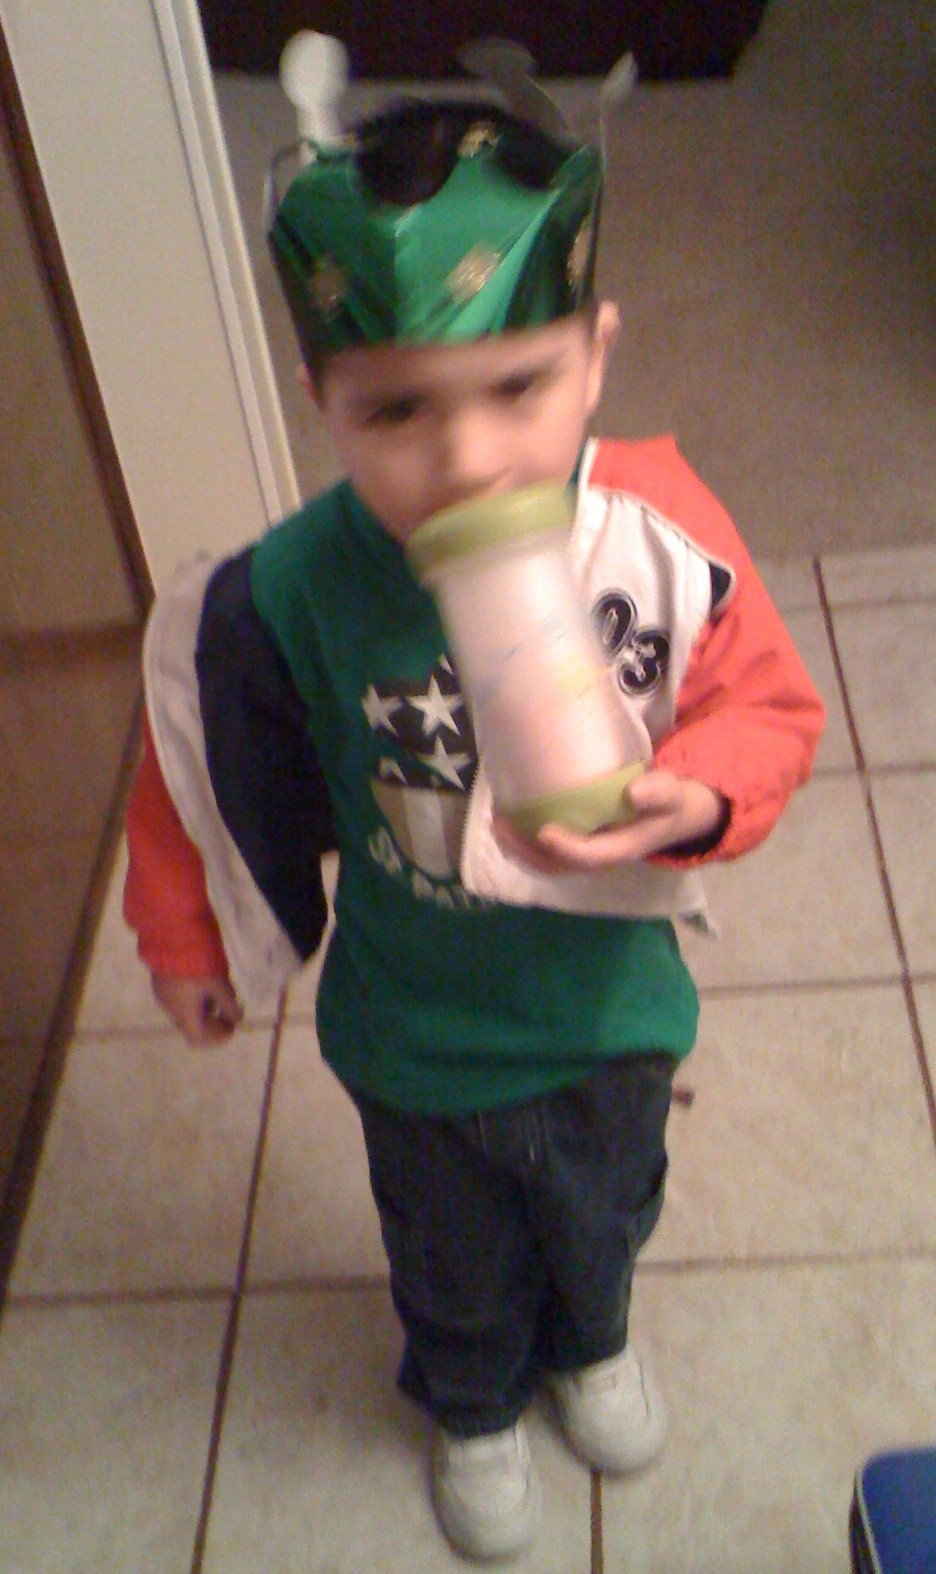 It was St. Patrick's Day, this was his outfit.